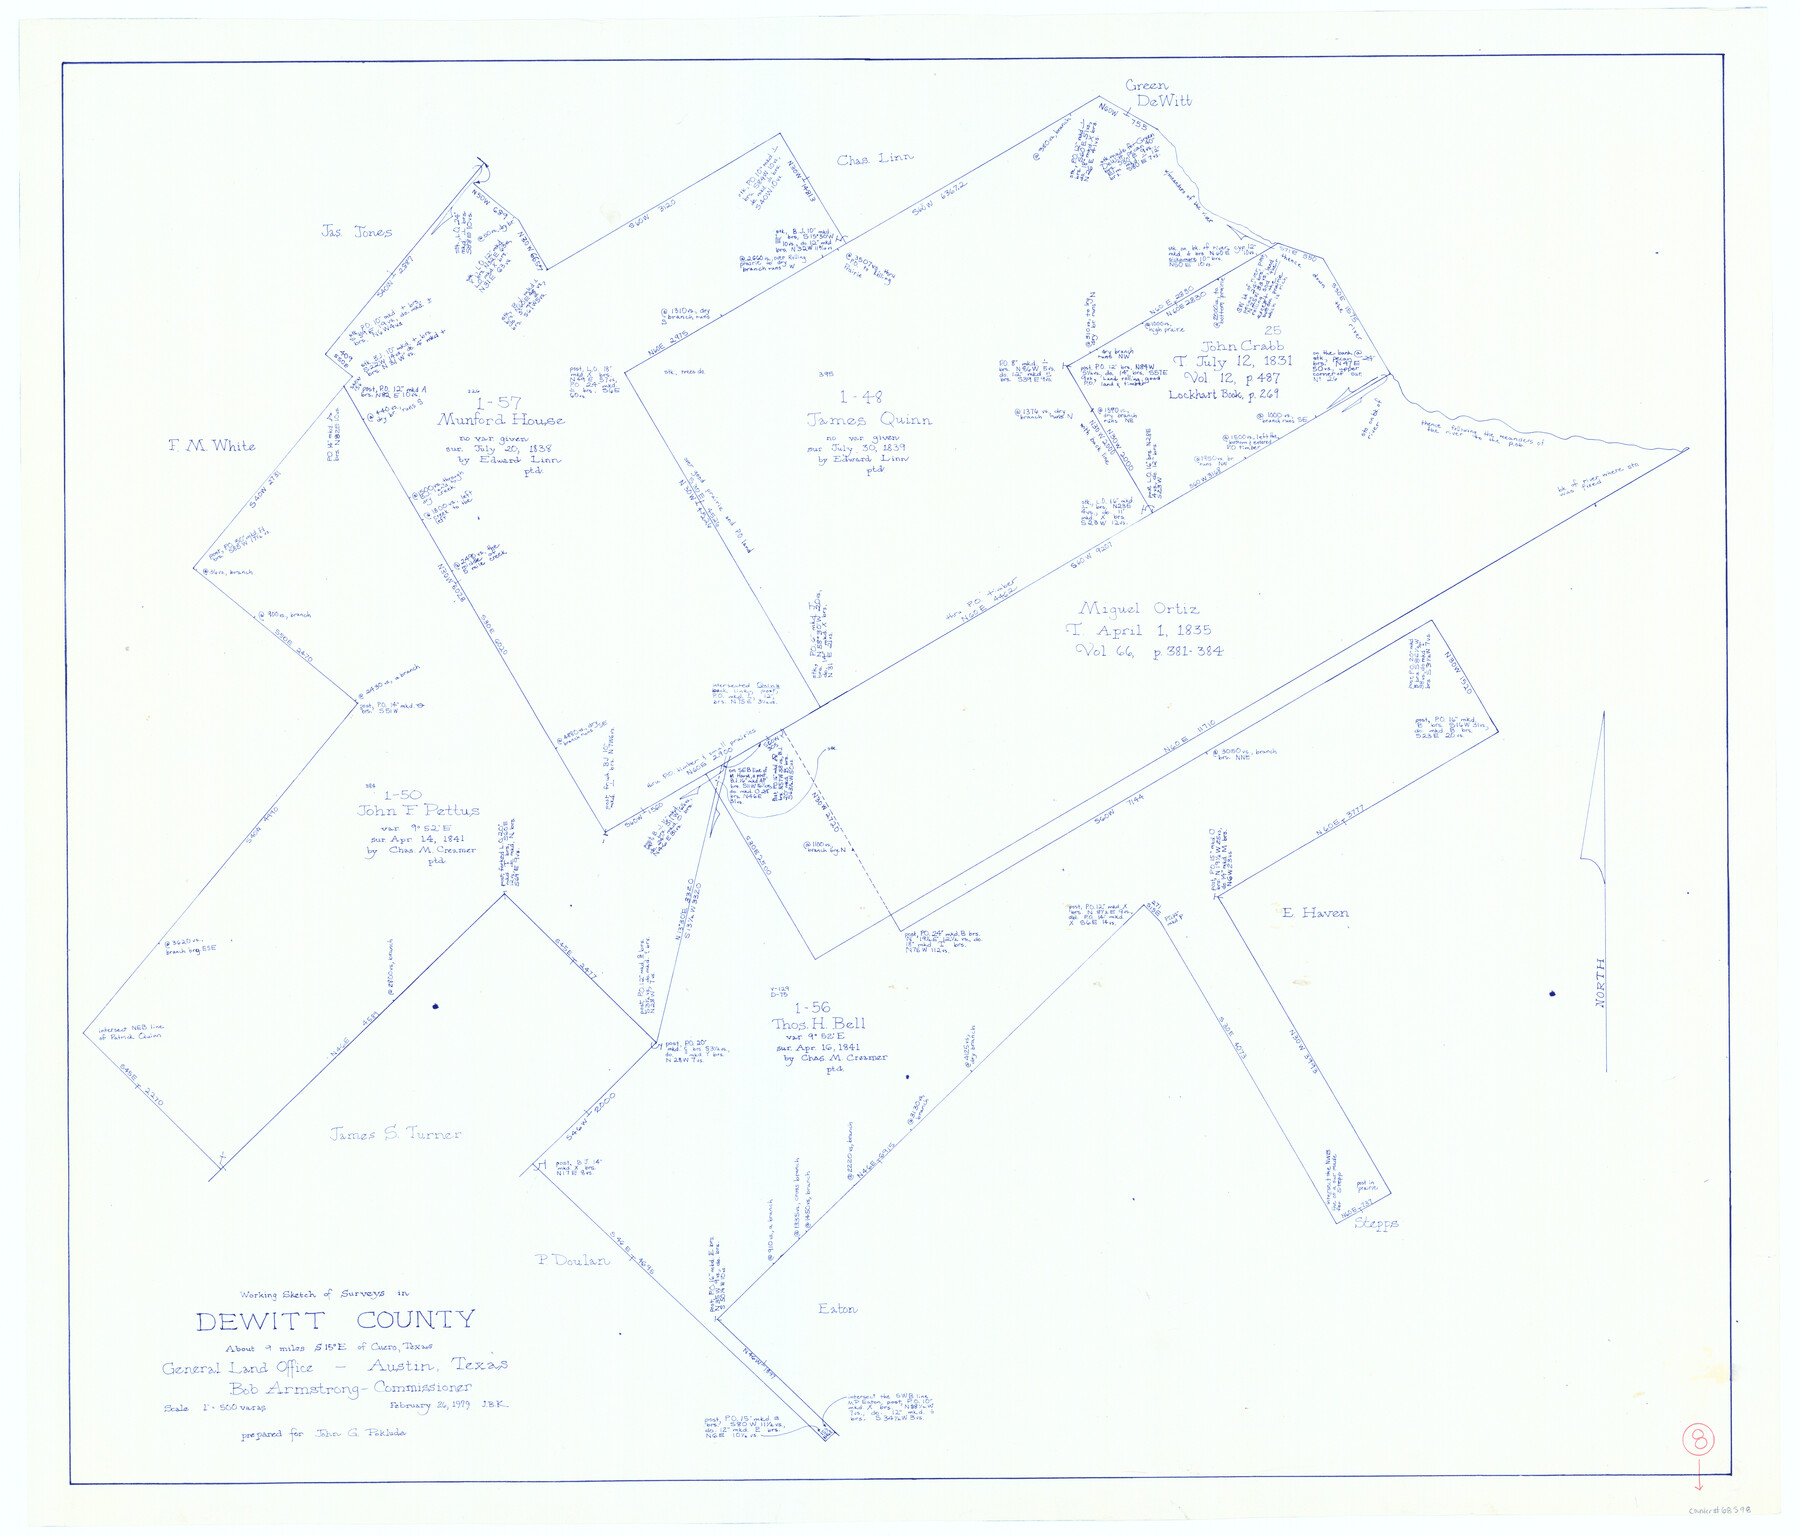 68598, DeWitt County Working Sketch 8, General Map Collection